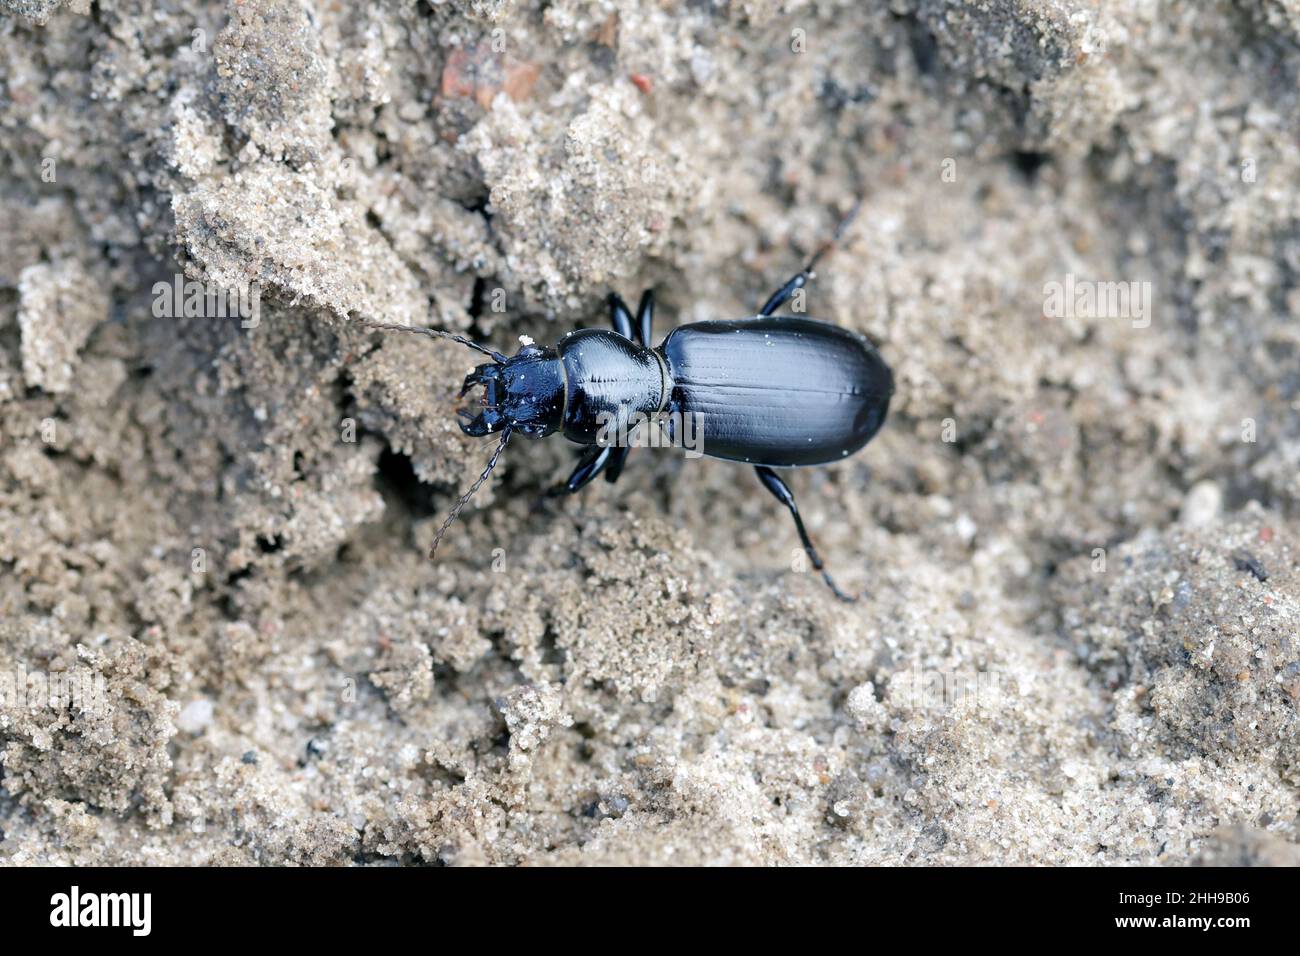 A beetle Broscus cephalotes of the family Carabidae - Ground beetles on soils in an agricultural environment. It is a predator that hunt on plant pest Stock Photo